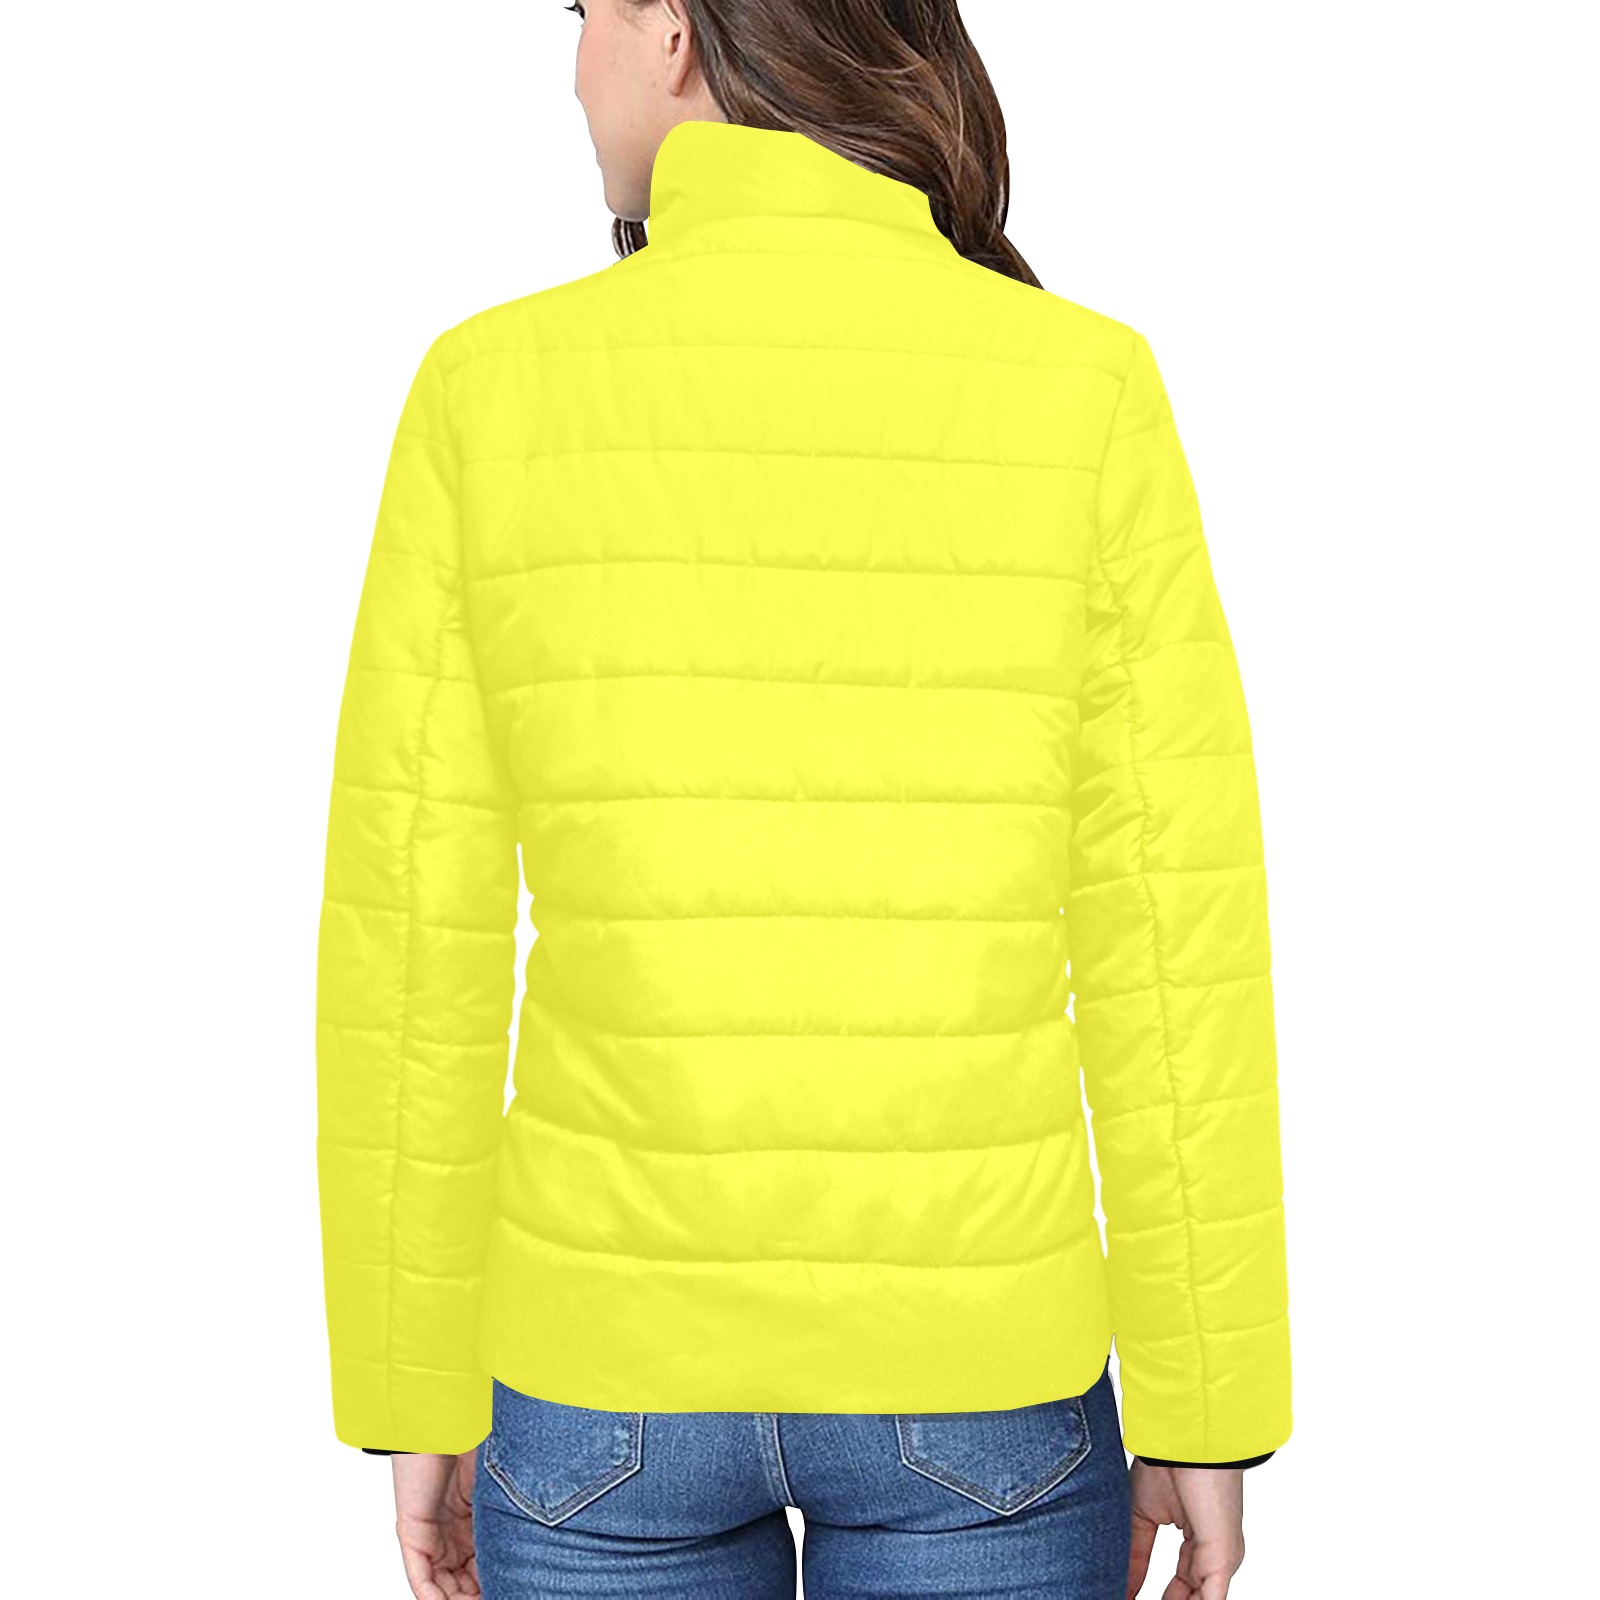 color maximum yellow Women's Stand Collar Padded Jacket (Model H41)